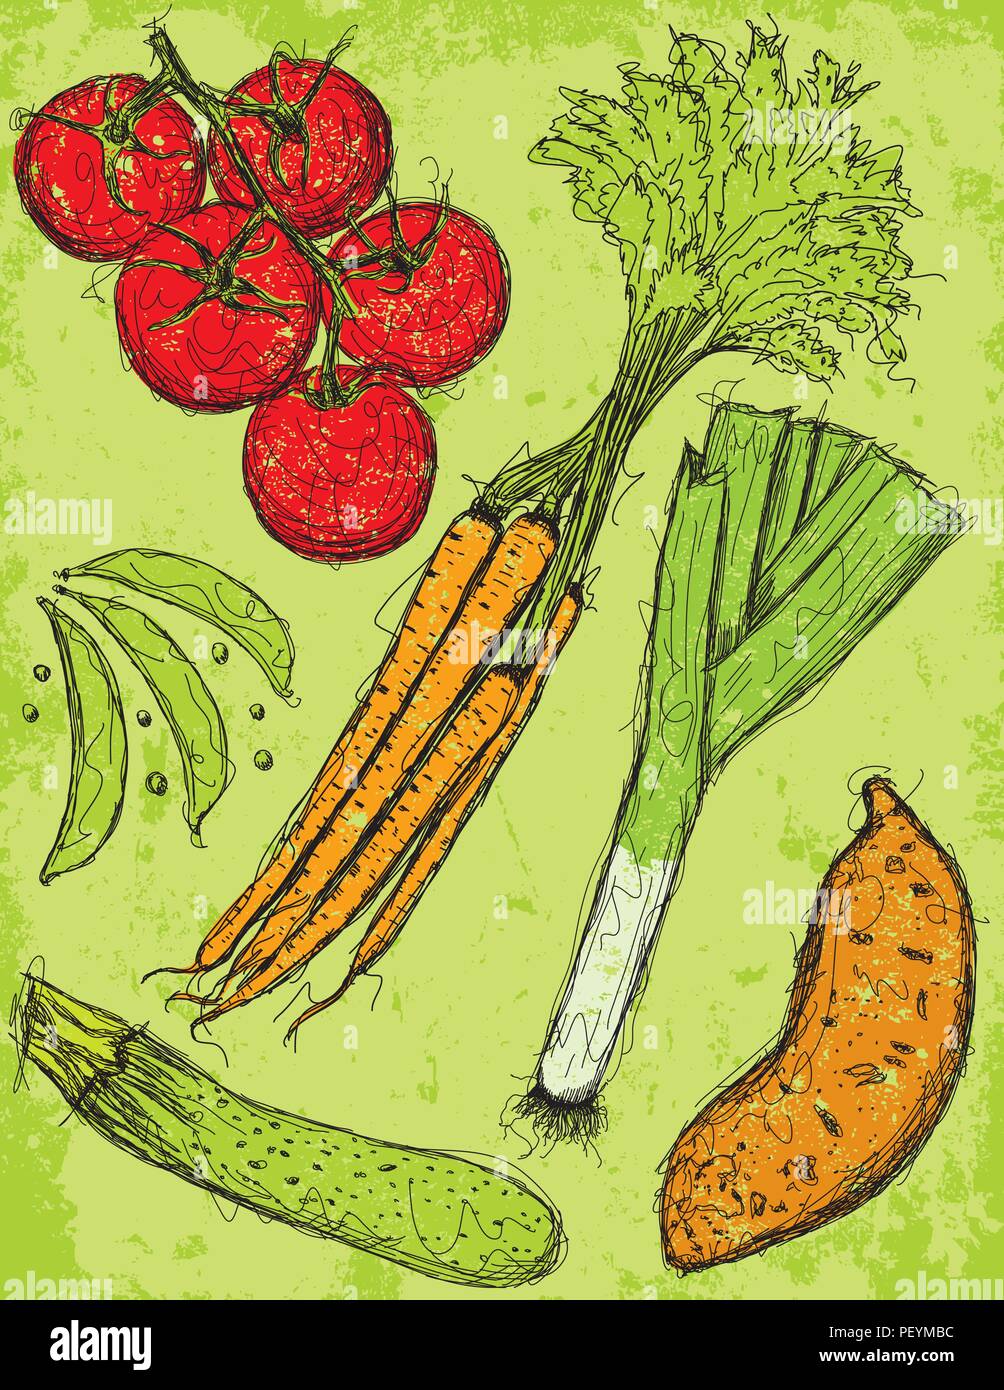 Vegetable sketches Mixed vegetables over a textured background. Stock Vector